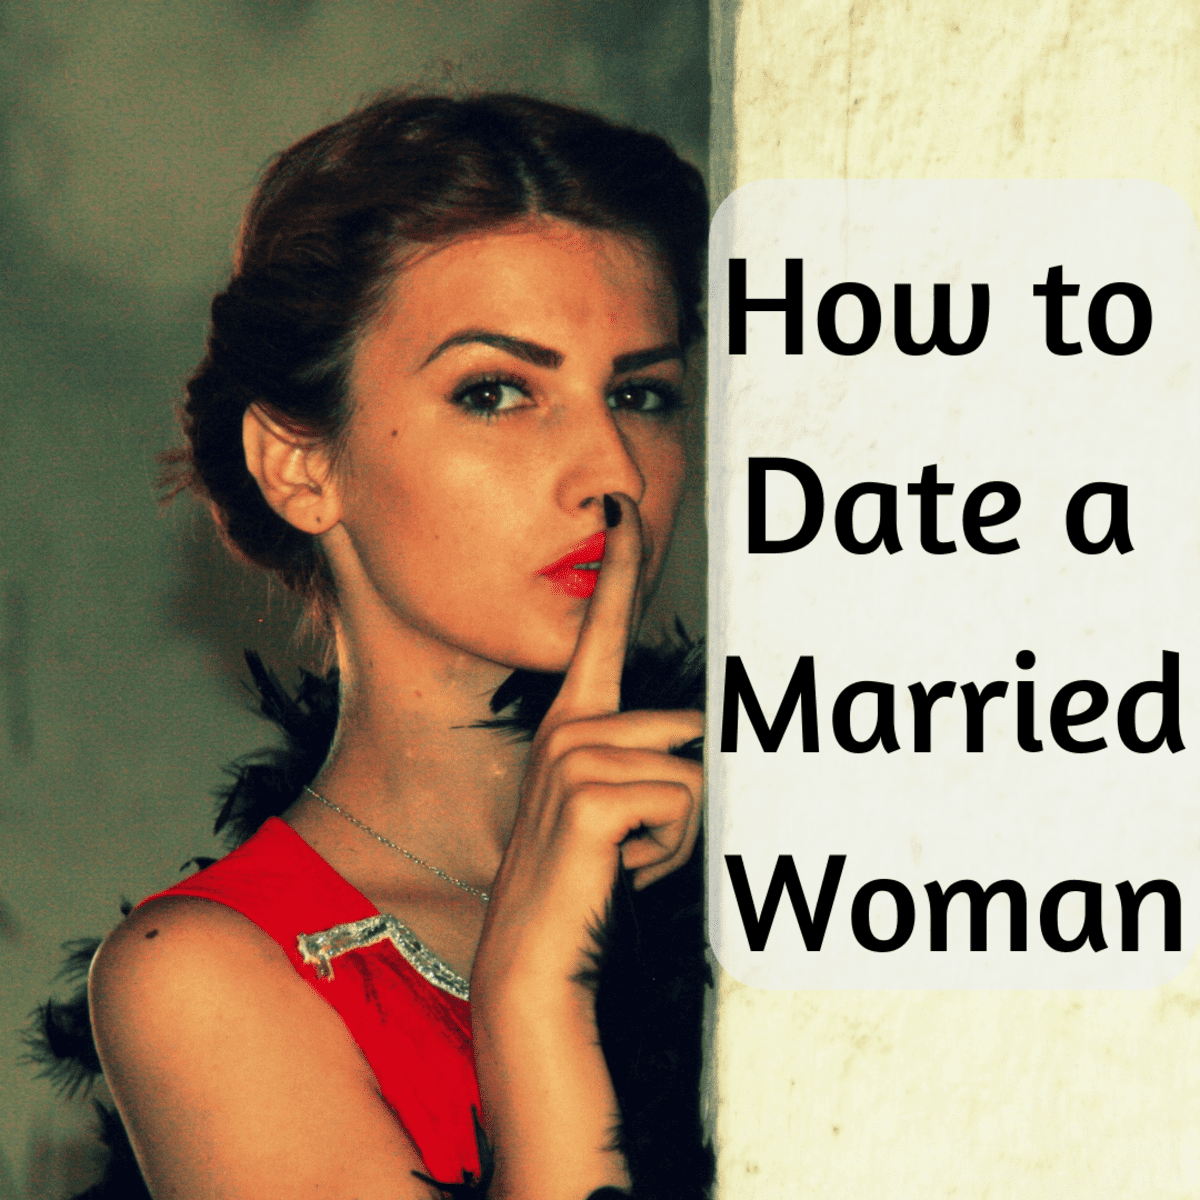 How to Date a Married Woman